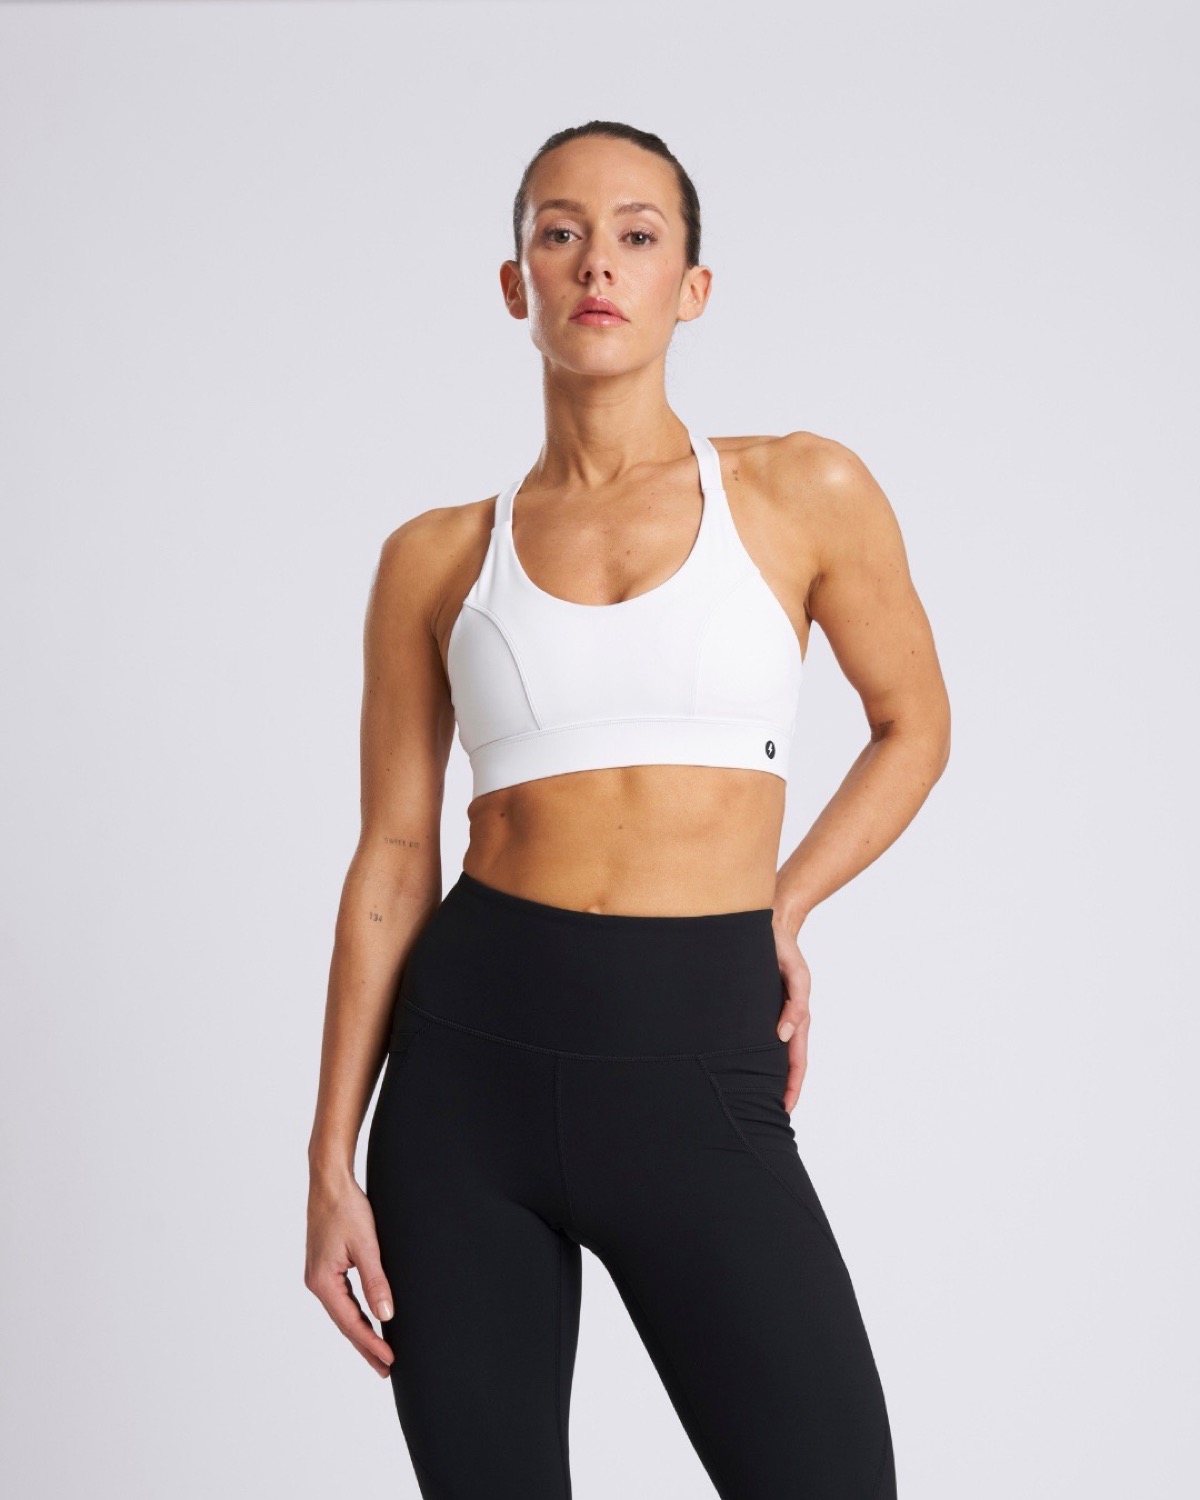 Dunnes Stores - Our much-loved sports bras now come in two